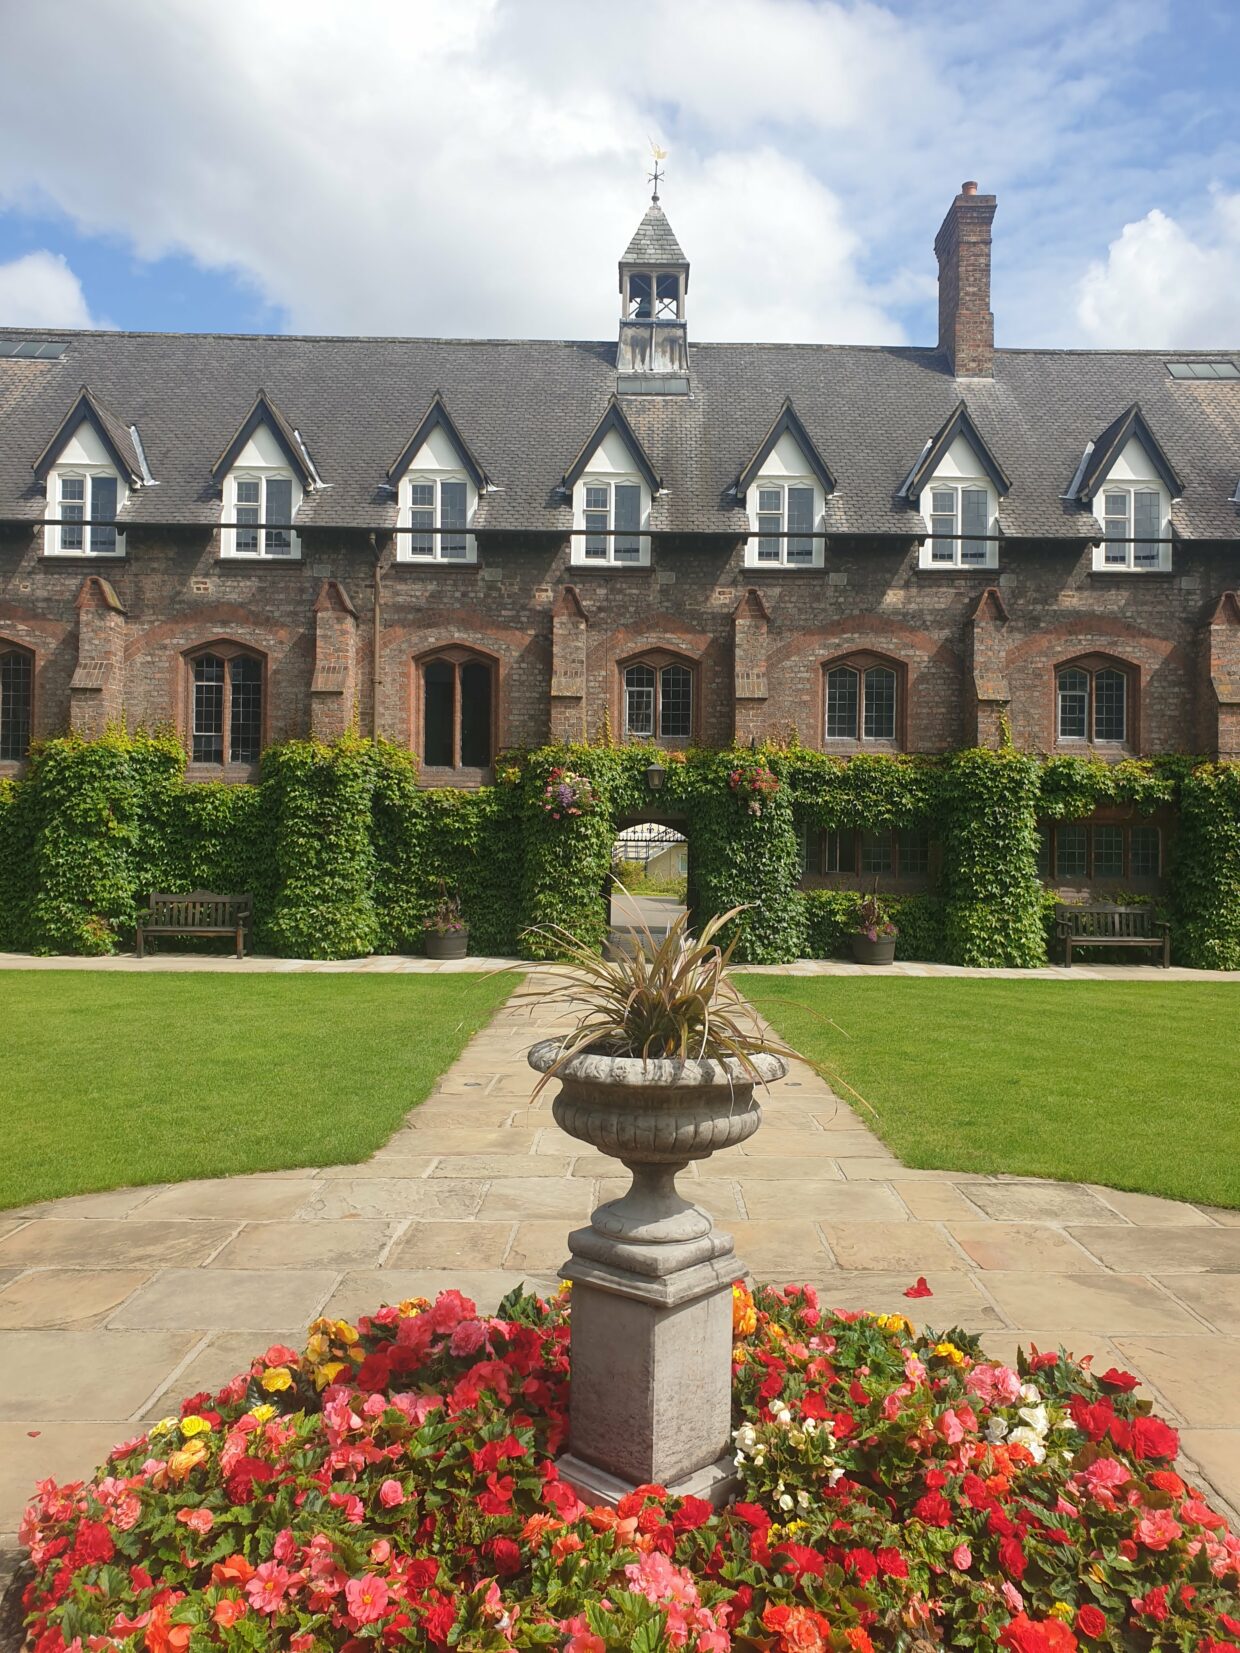 A view of Quad East with the centre piece and flowers around it.